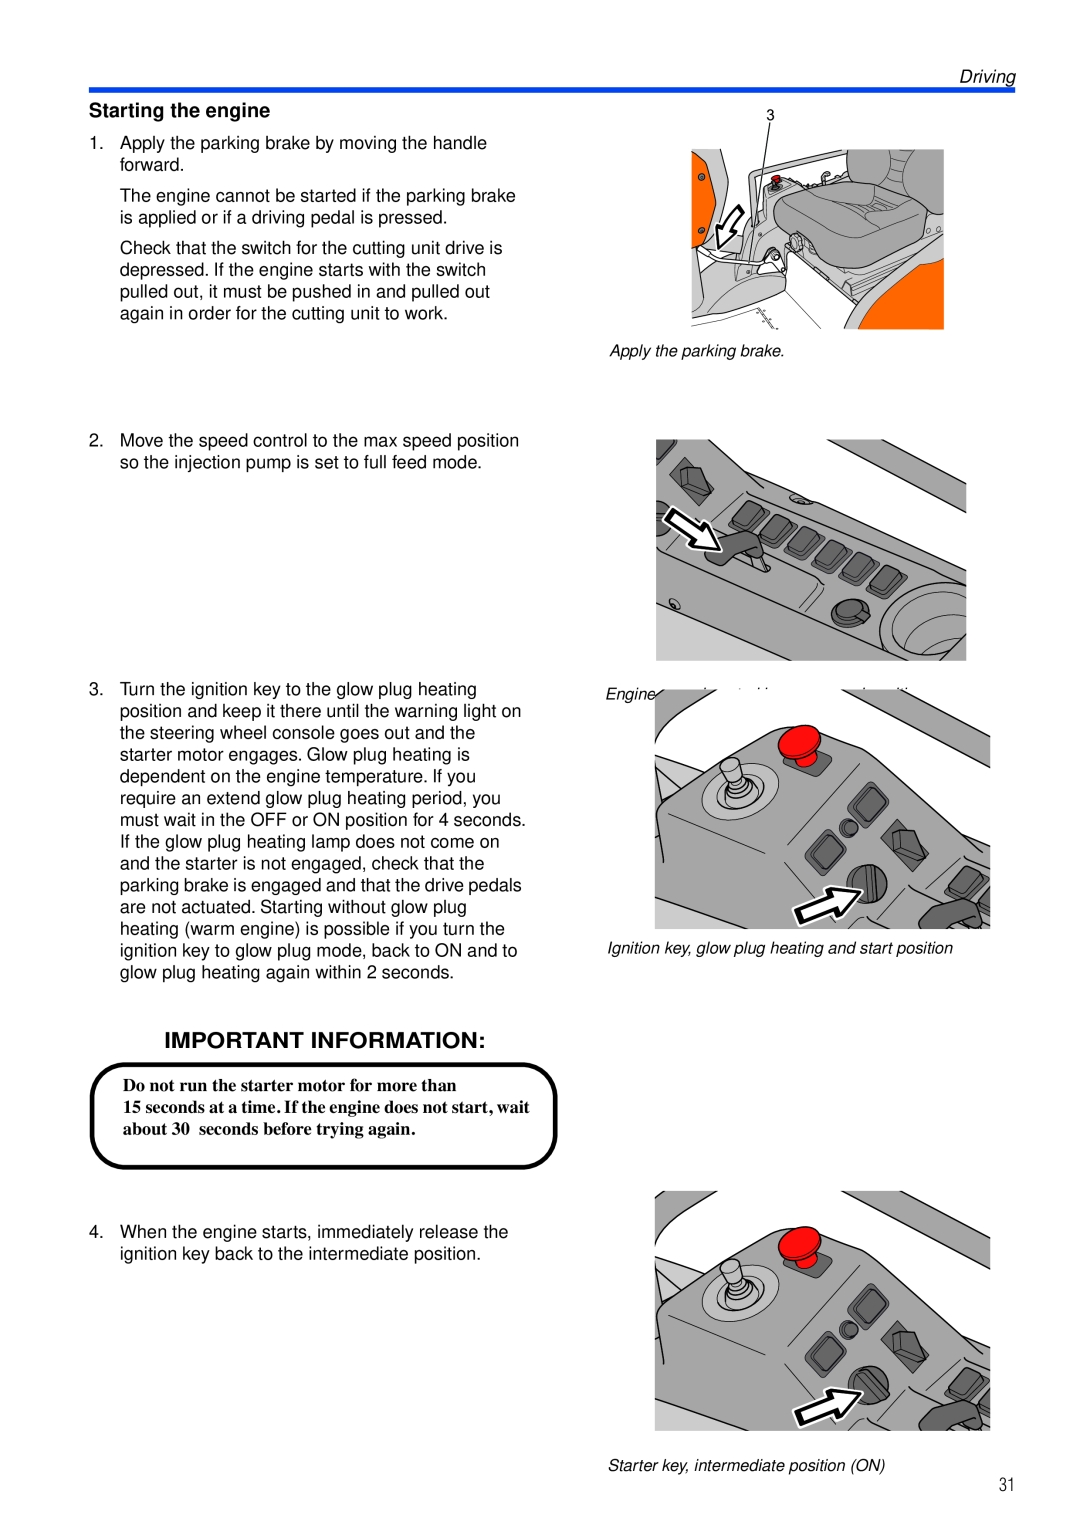 Husqvarna PT26 D manual Starting the engine, Do not run the starter motor for more than, Important Information, Driving 